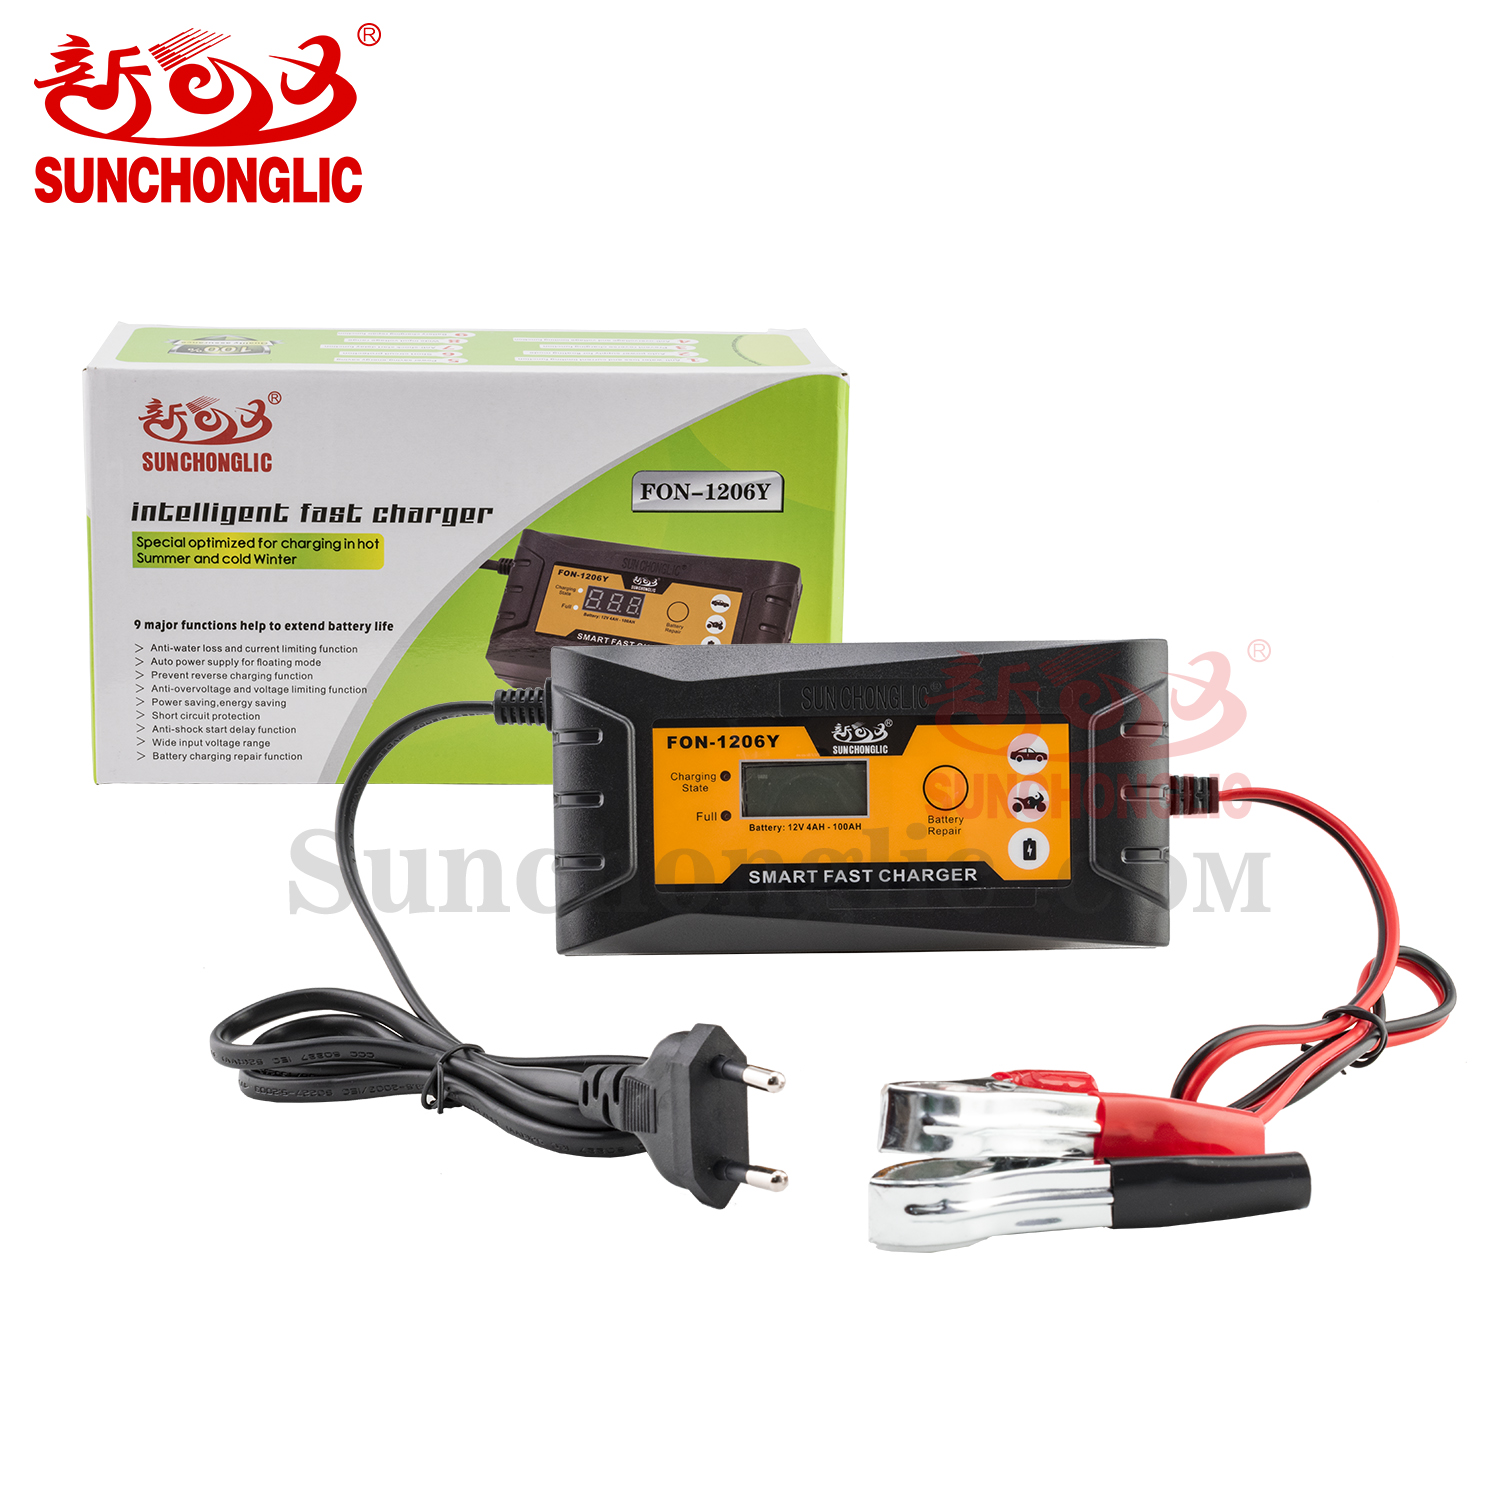 Sunchonglic pulse repair battery charger 12V 6A car lead-acid battery charger 